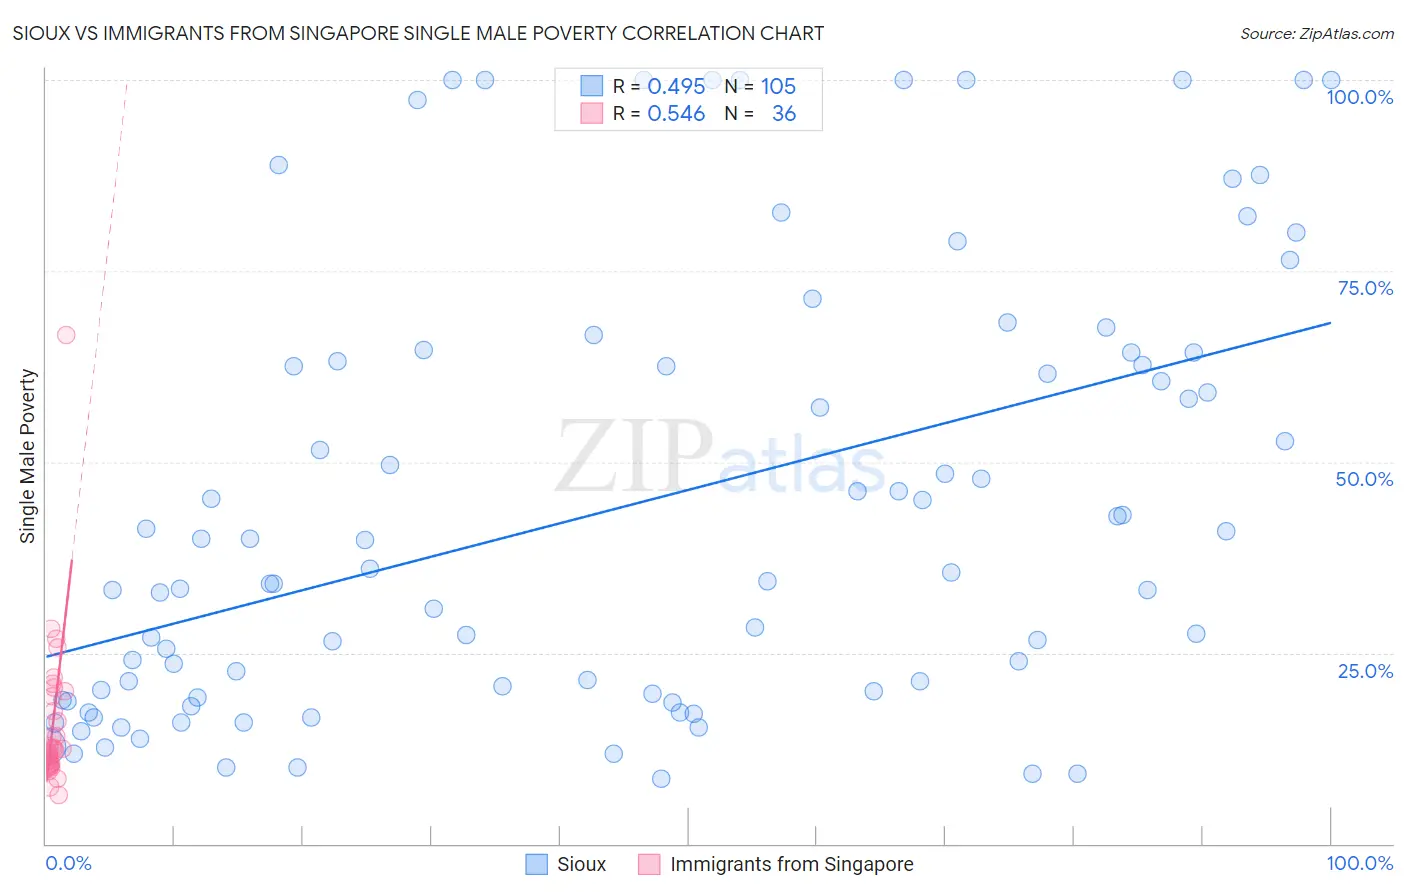 Sioux vs Immigrants from Singapore Single Male Poverty